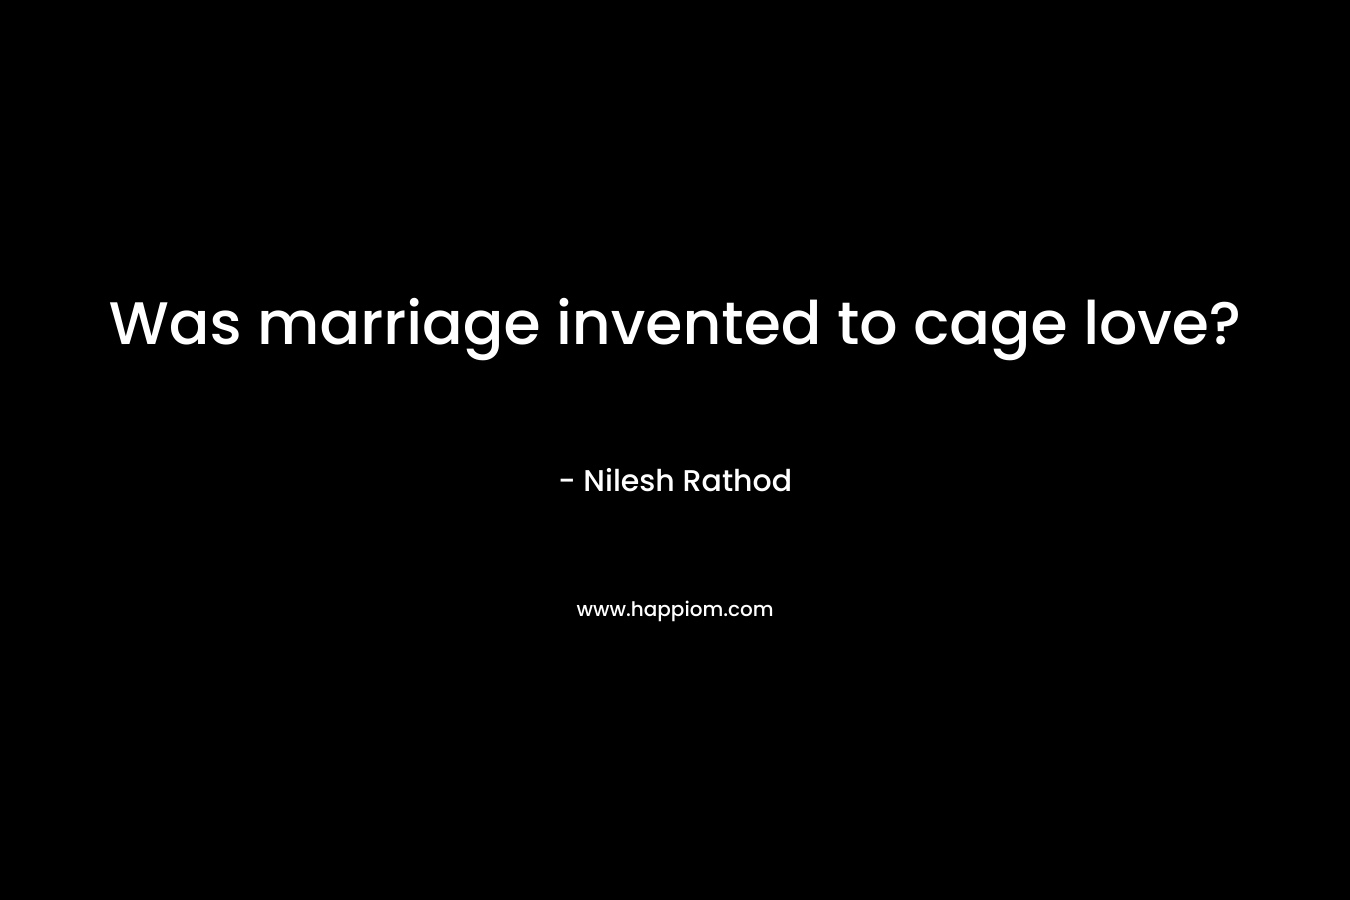 Was marriage invented to cage love?